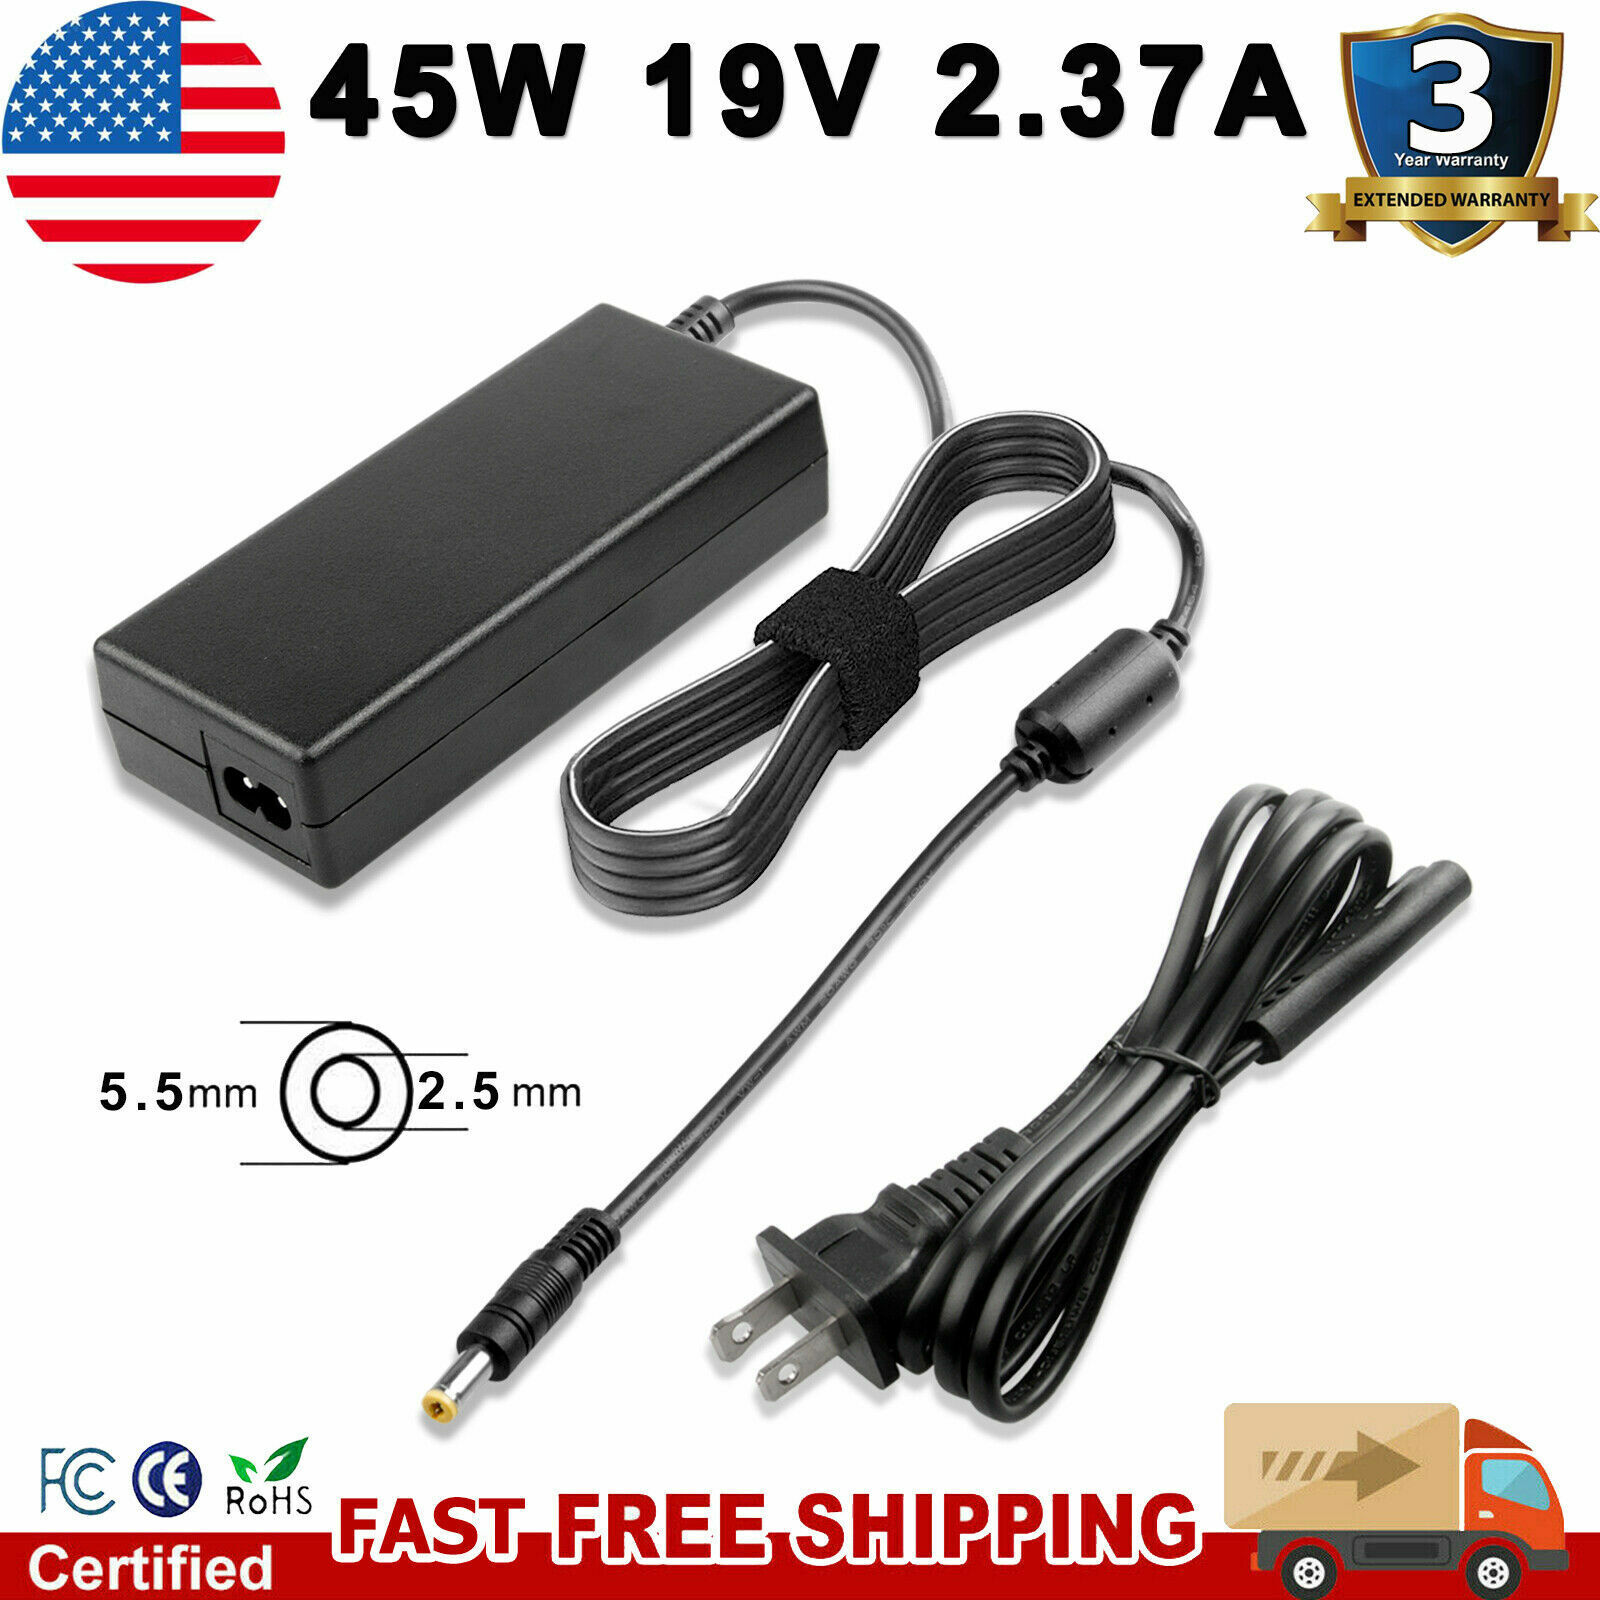 AC Adapter Charger for Toshiba PA5177U-1ACA 19V 2.37A 45W Laptop Power Supply US